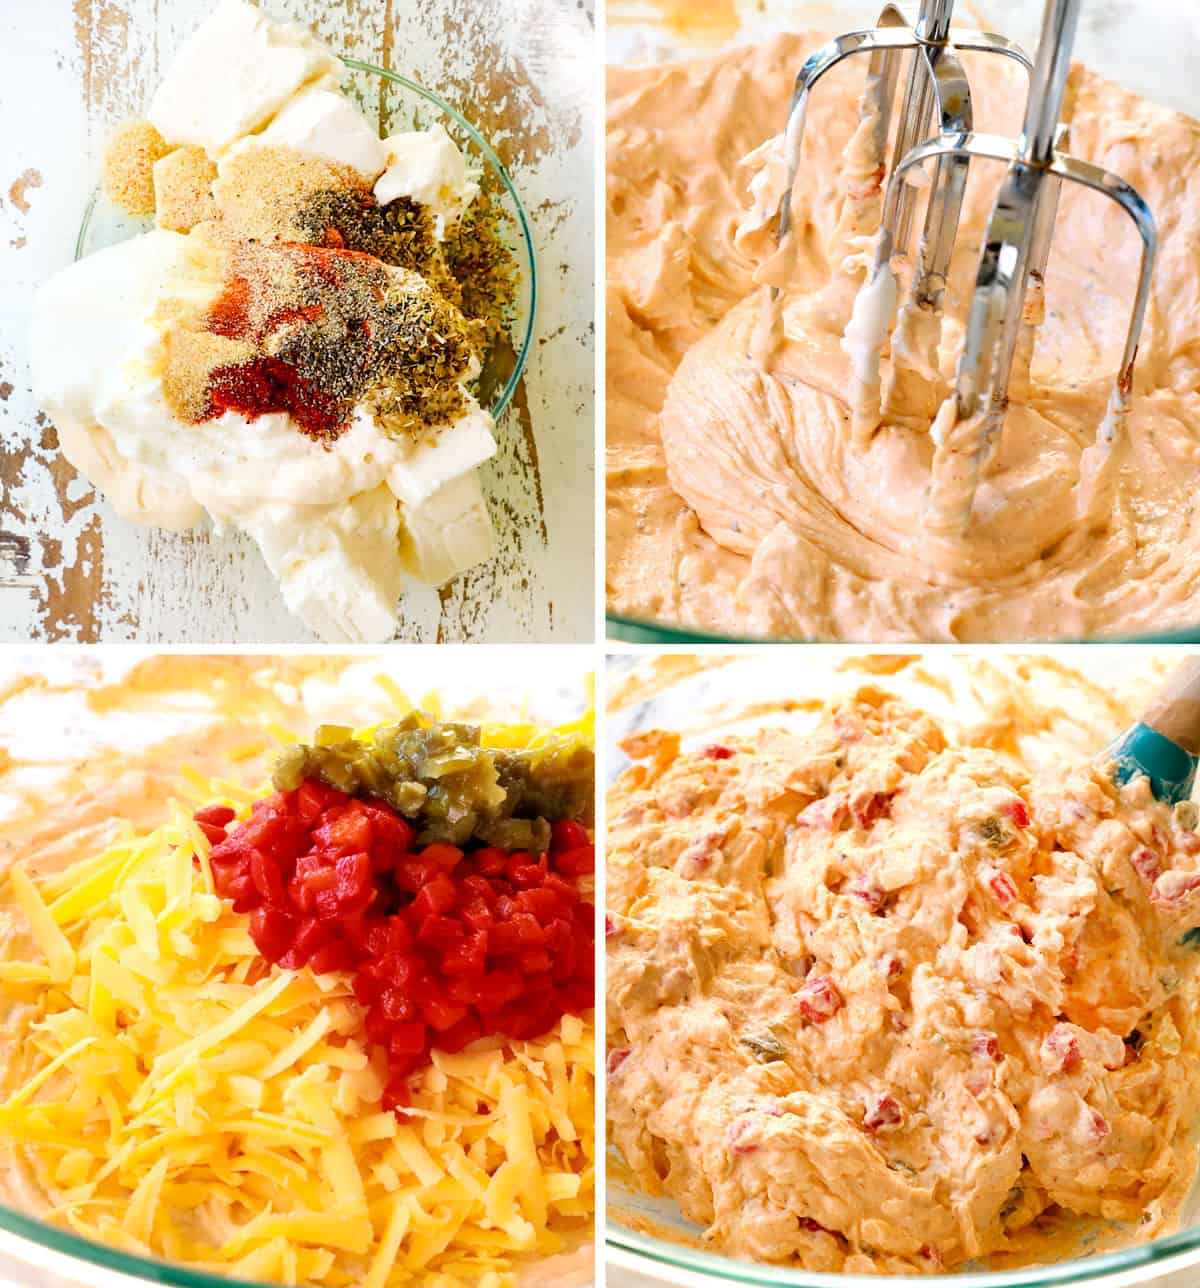 a collage showing how to make pimento cheese by 1) adding cream cheese, sour cream, mayonnaise and spices to a bowl, blending with a mixer, then stirring in pimentos, sharp cheddar cheese and jalapenos